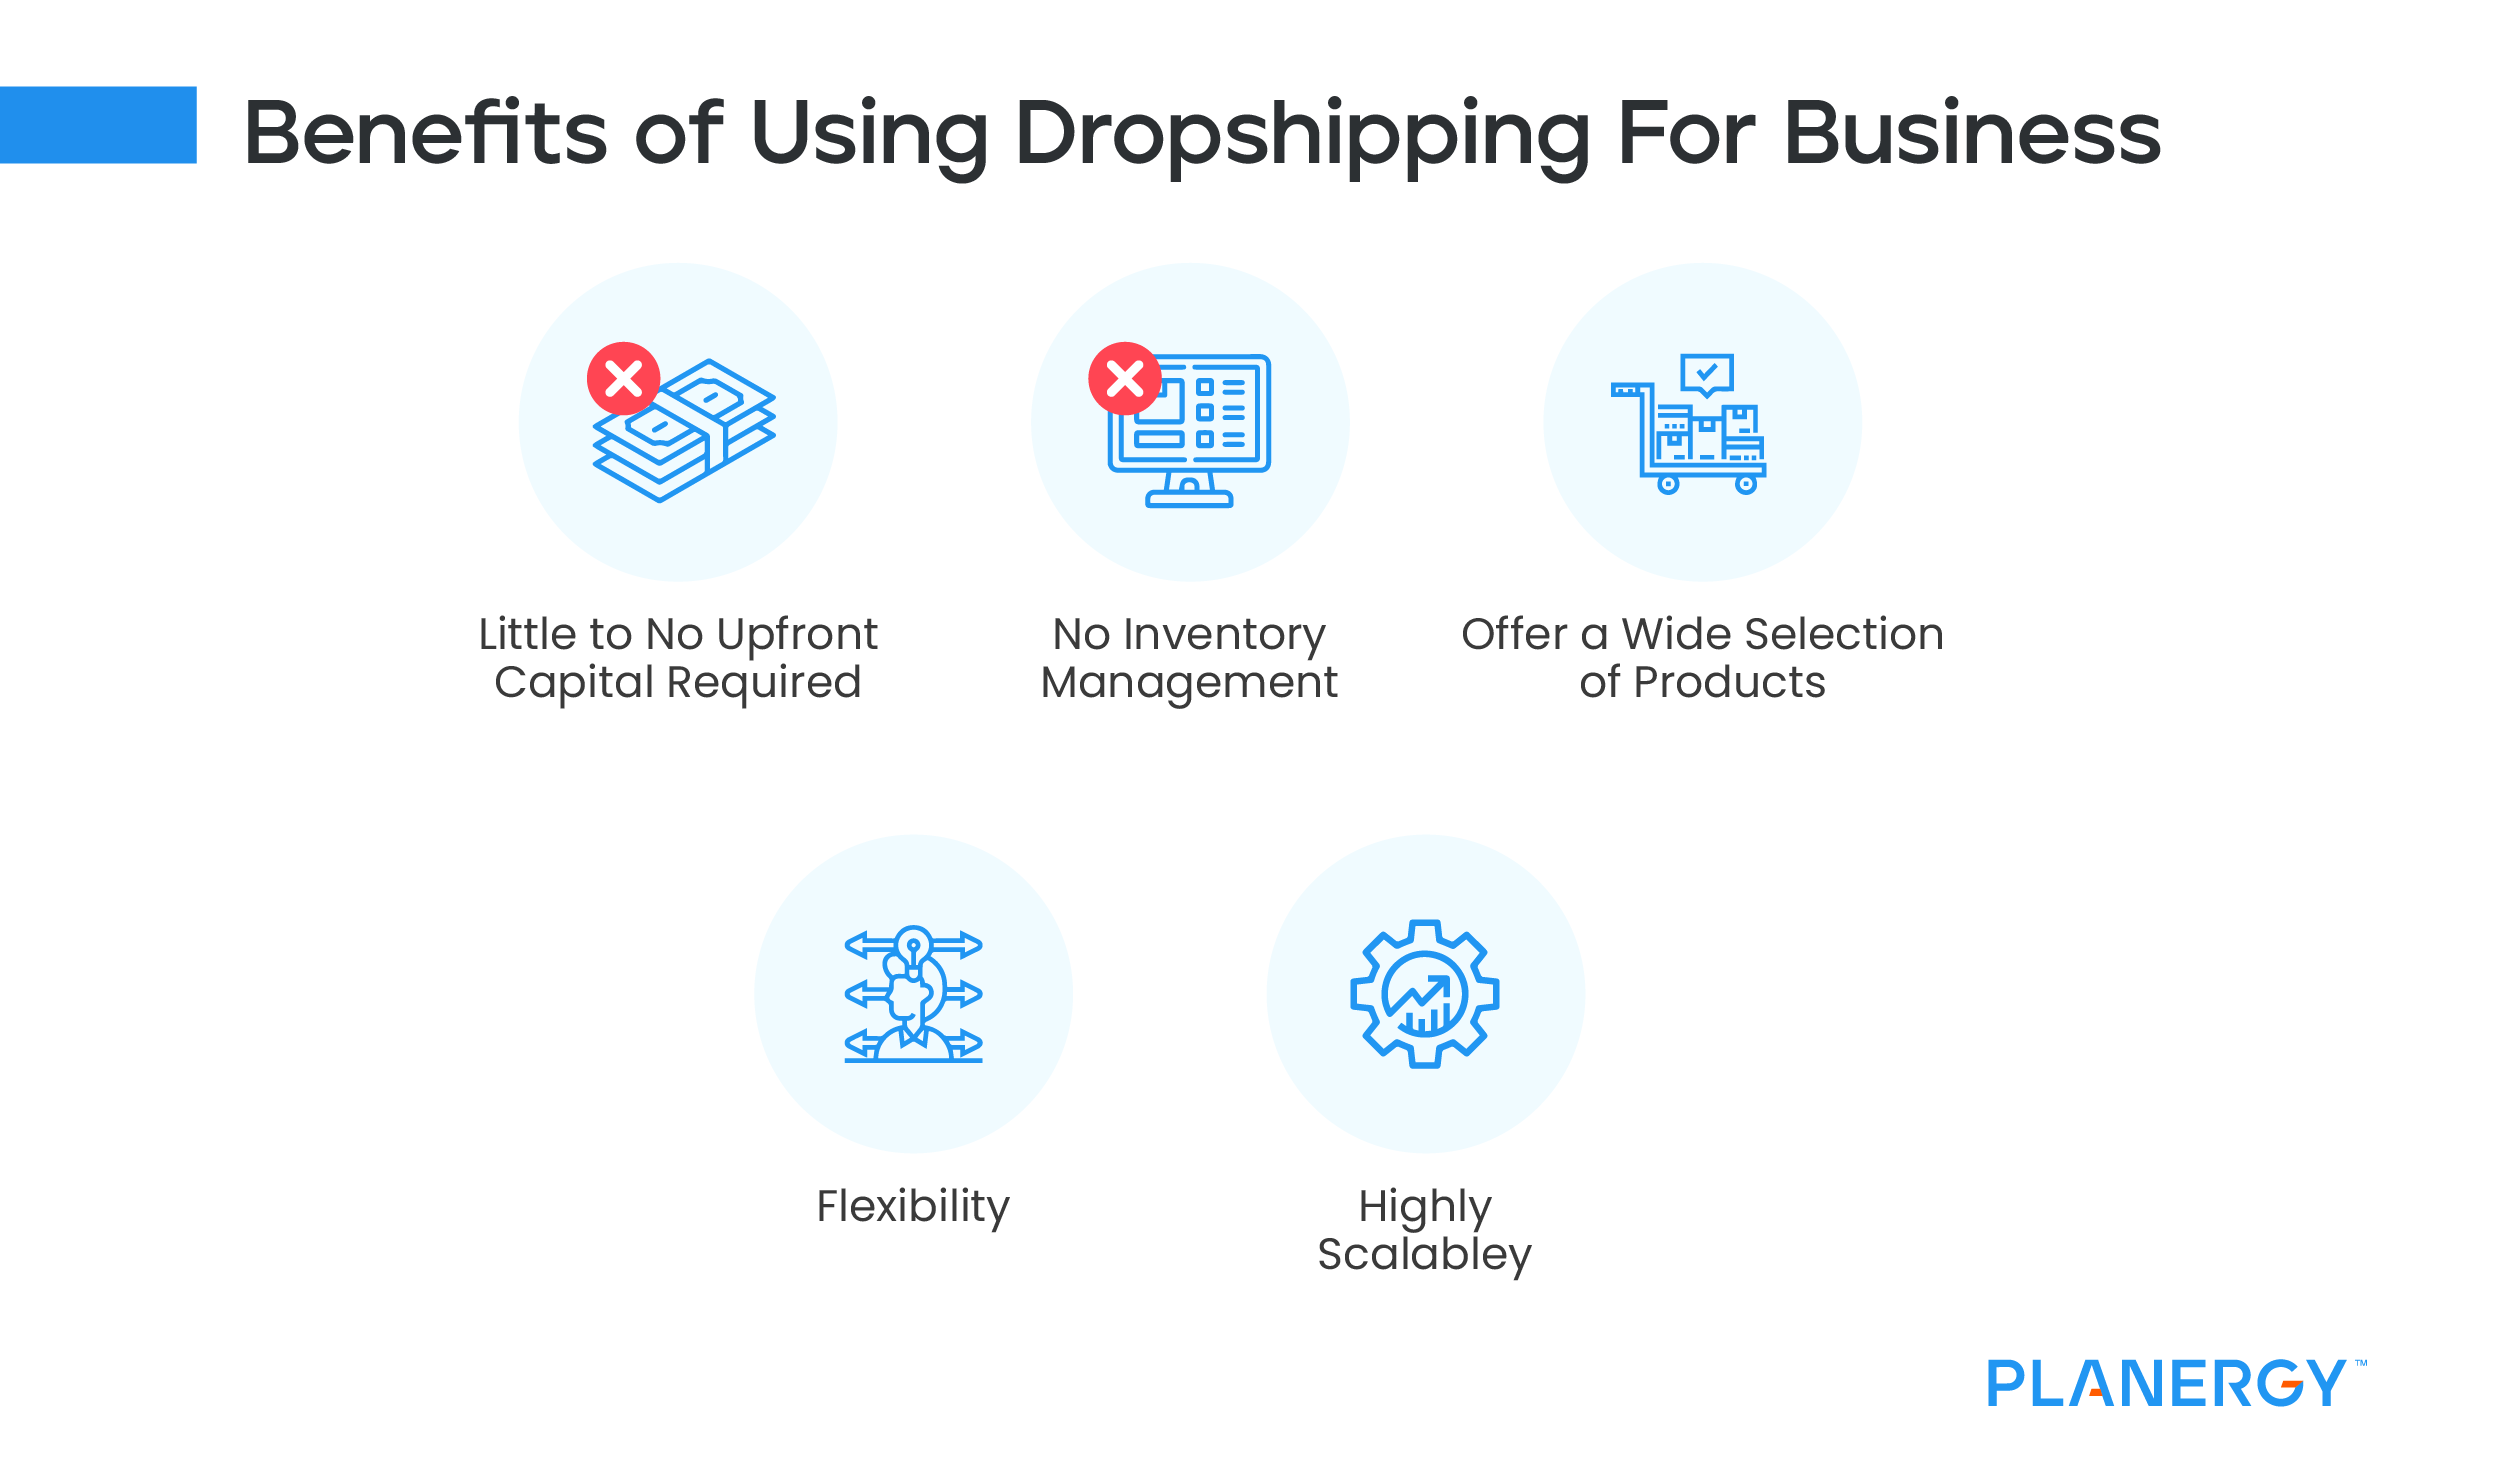 Benefits of Using Dropshipping for Business